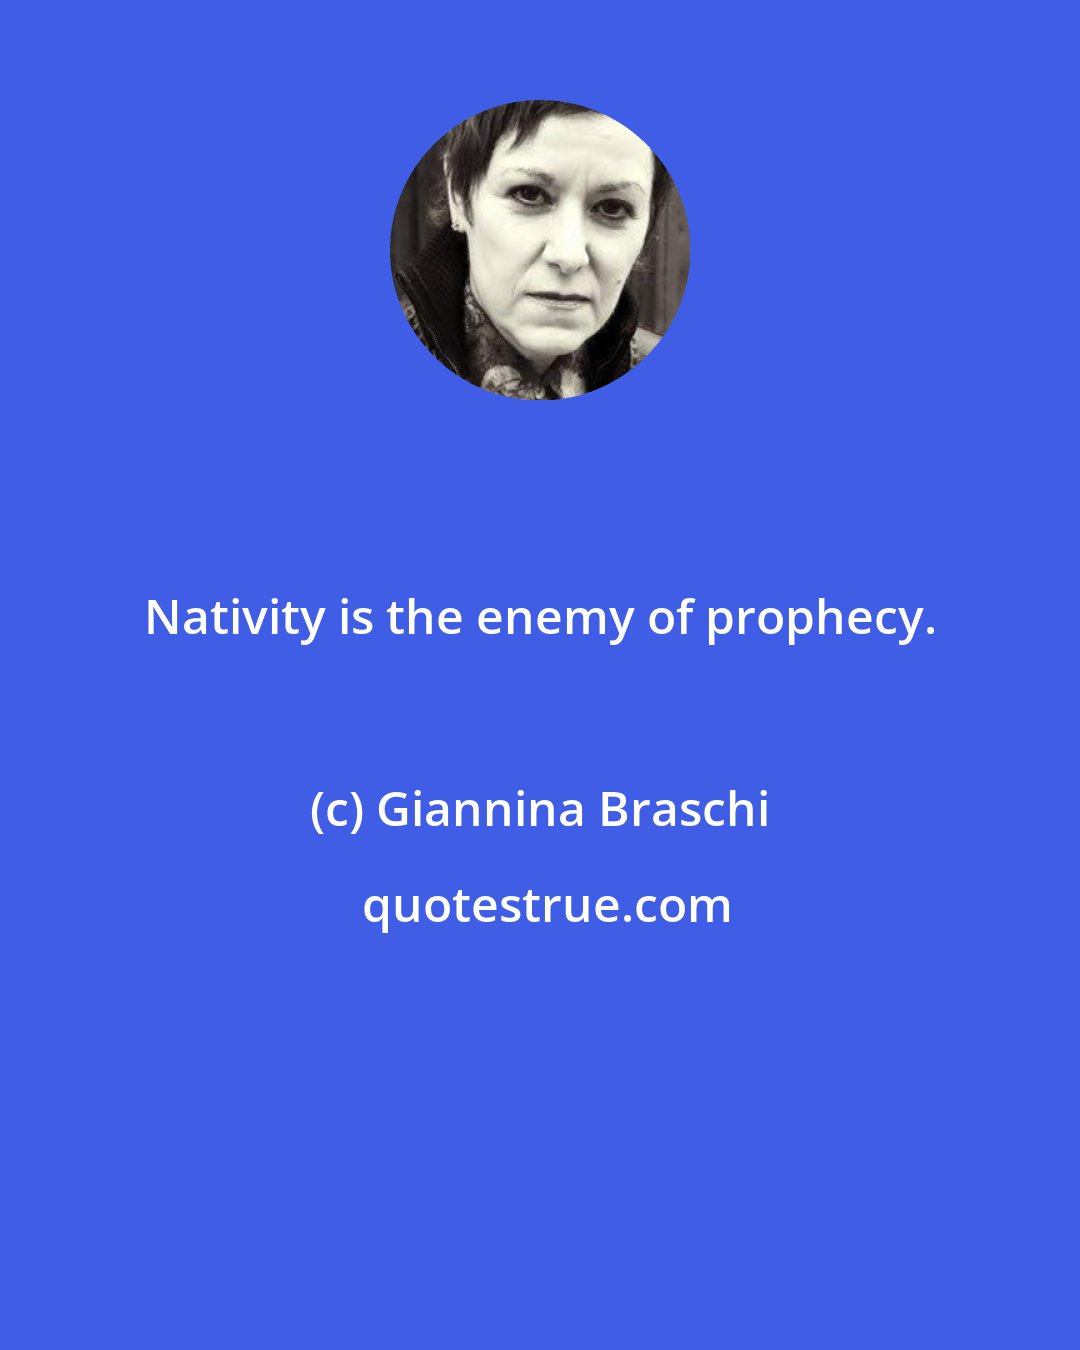 Giannina Braschi: Nativity is the enemy of prophecy.